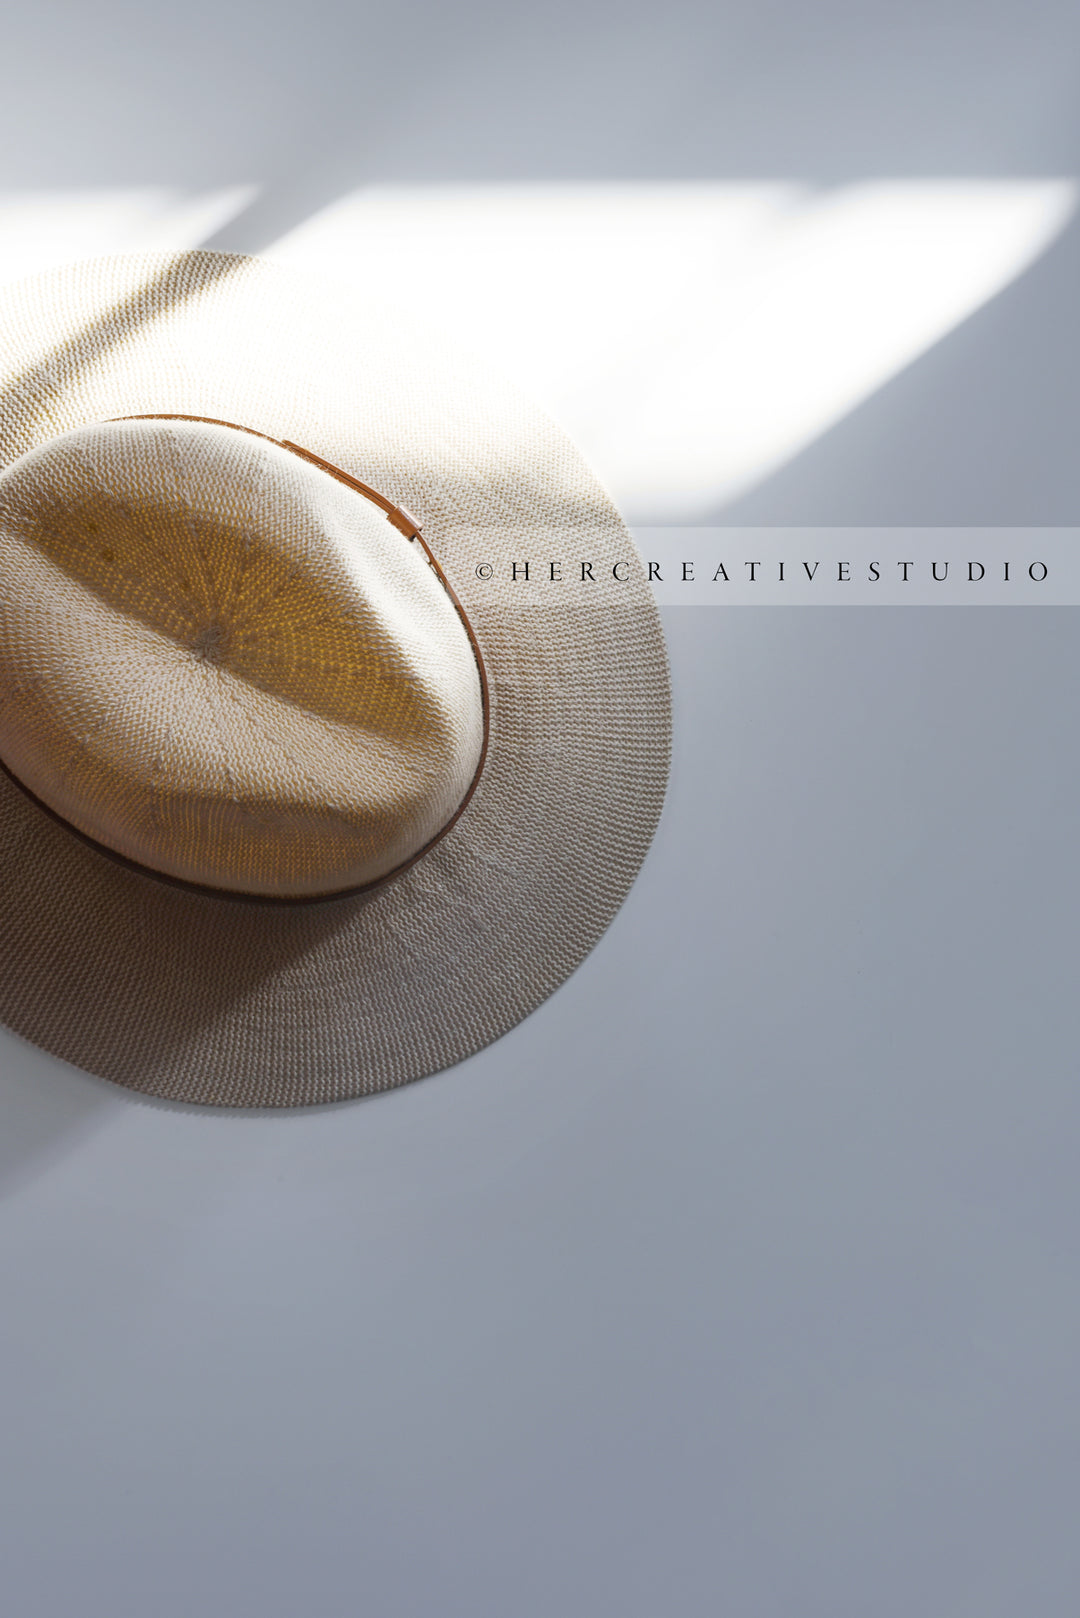 Panaman Hat in Sunlight, Styled Image